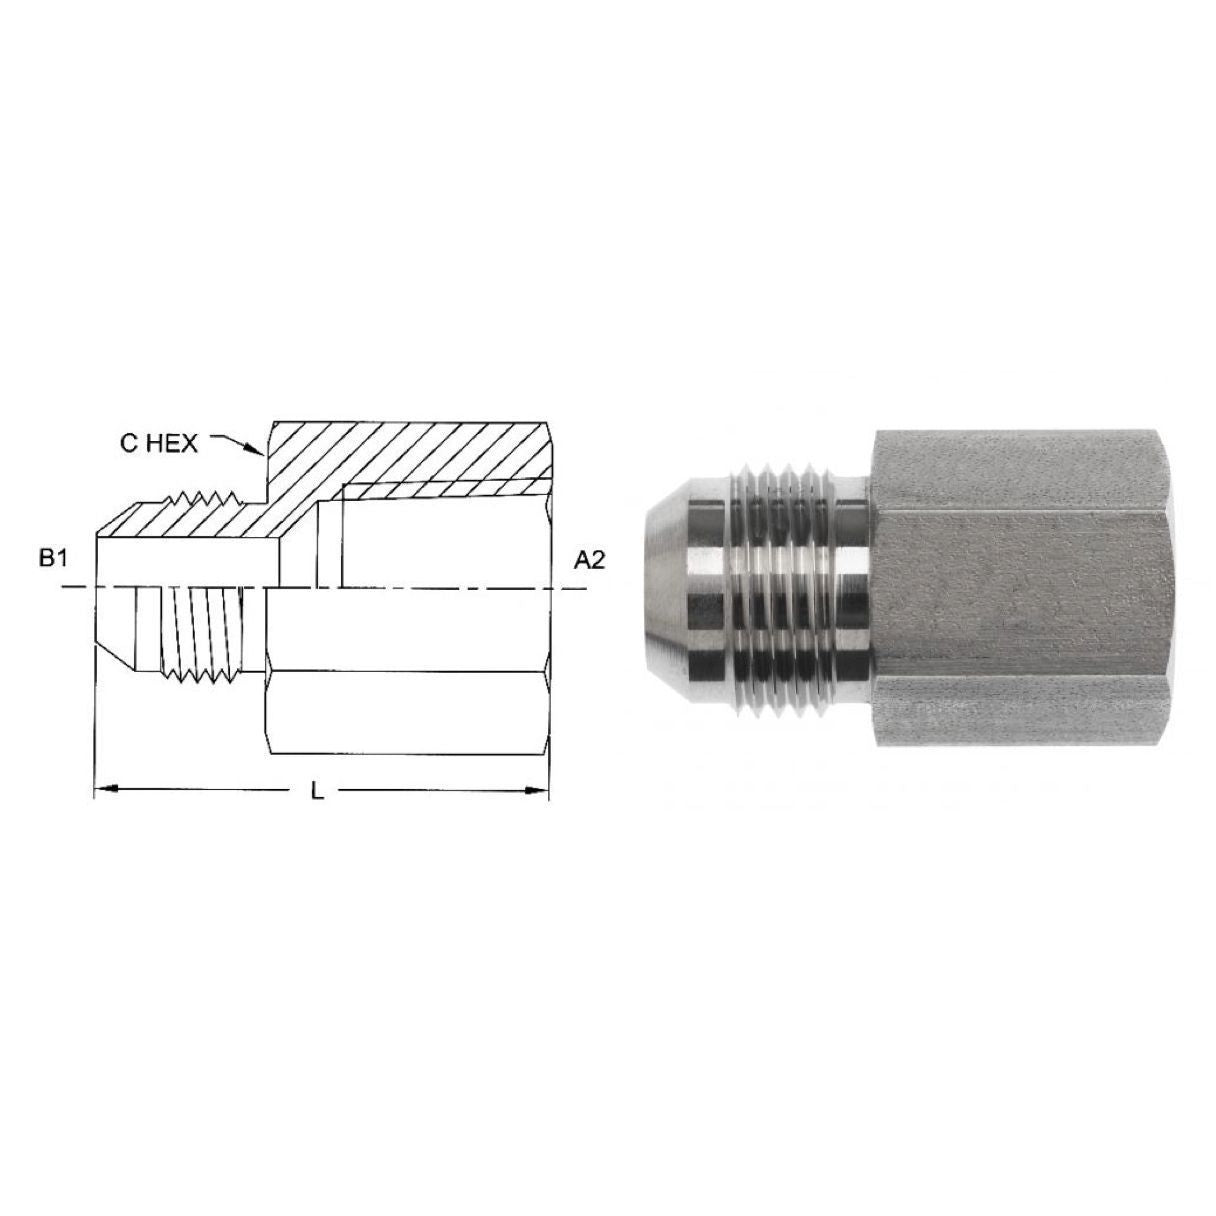 2405-20-20-SS : OneHydraulics  Adapter, Straight, 1.25 (1-1/4") Male NPT x 1.25 (1-1/4") Female, Stainless Steel, 3000psi